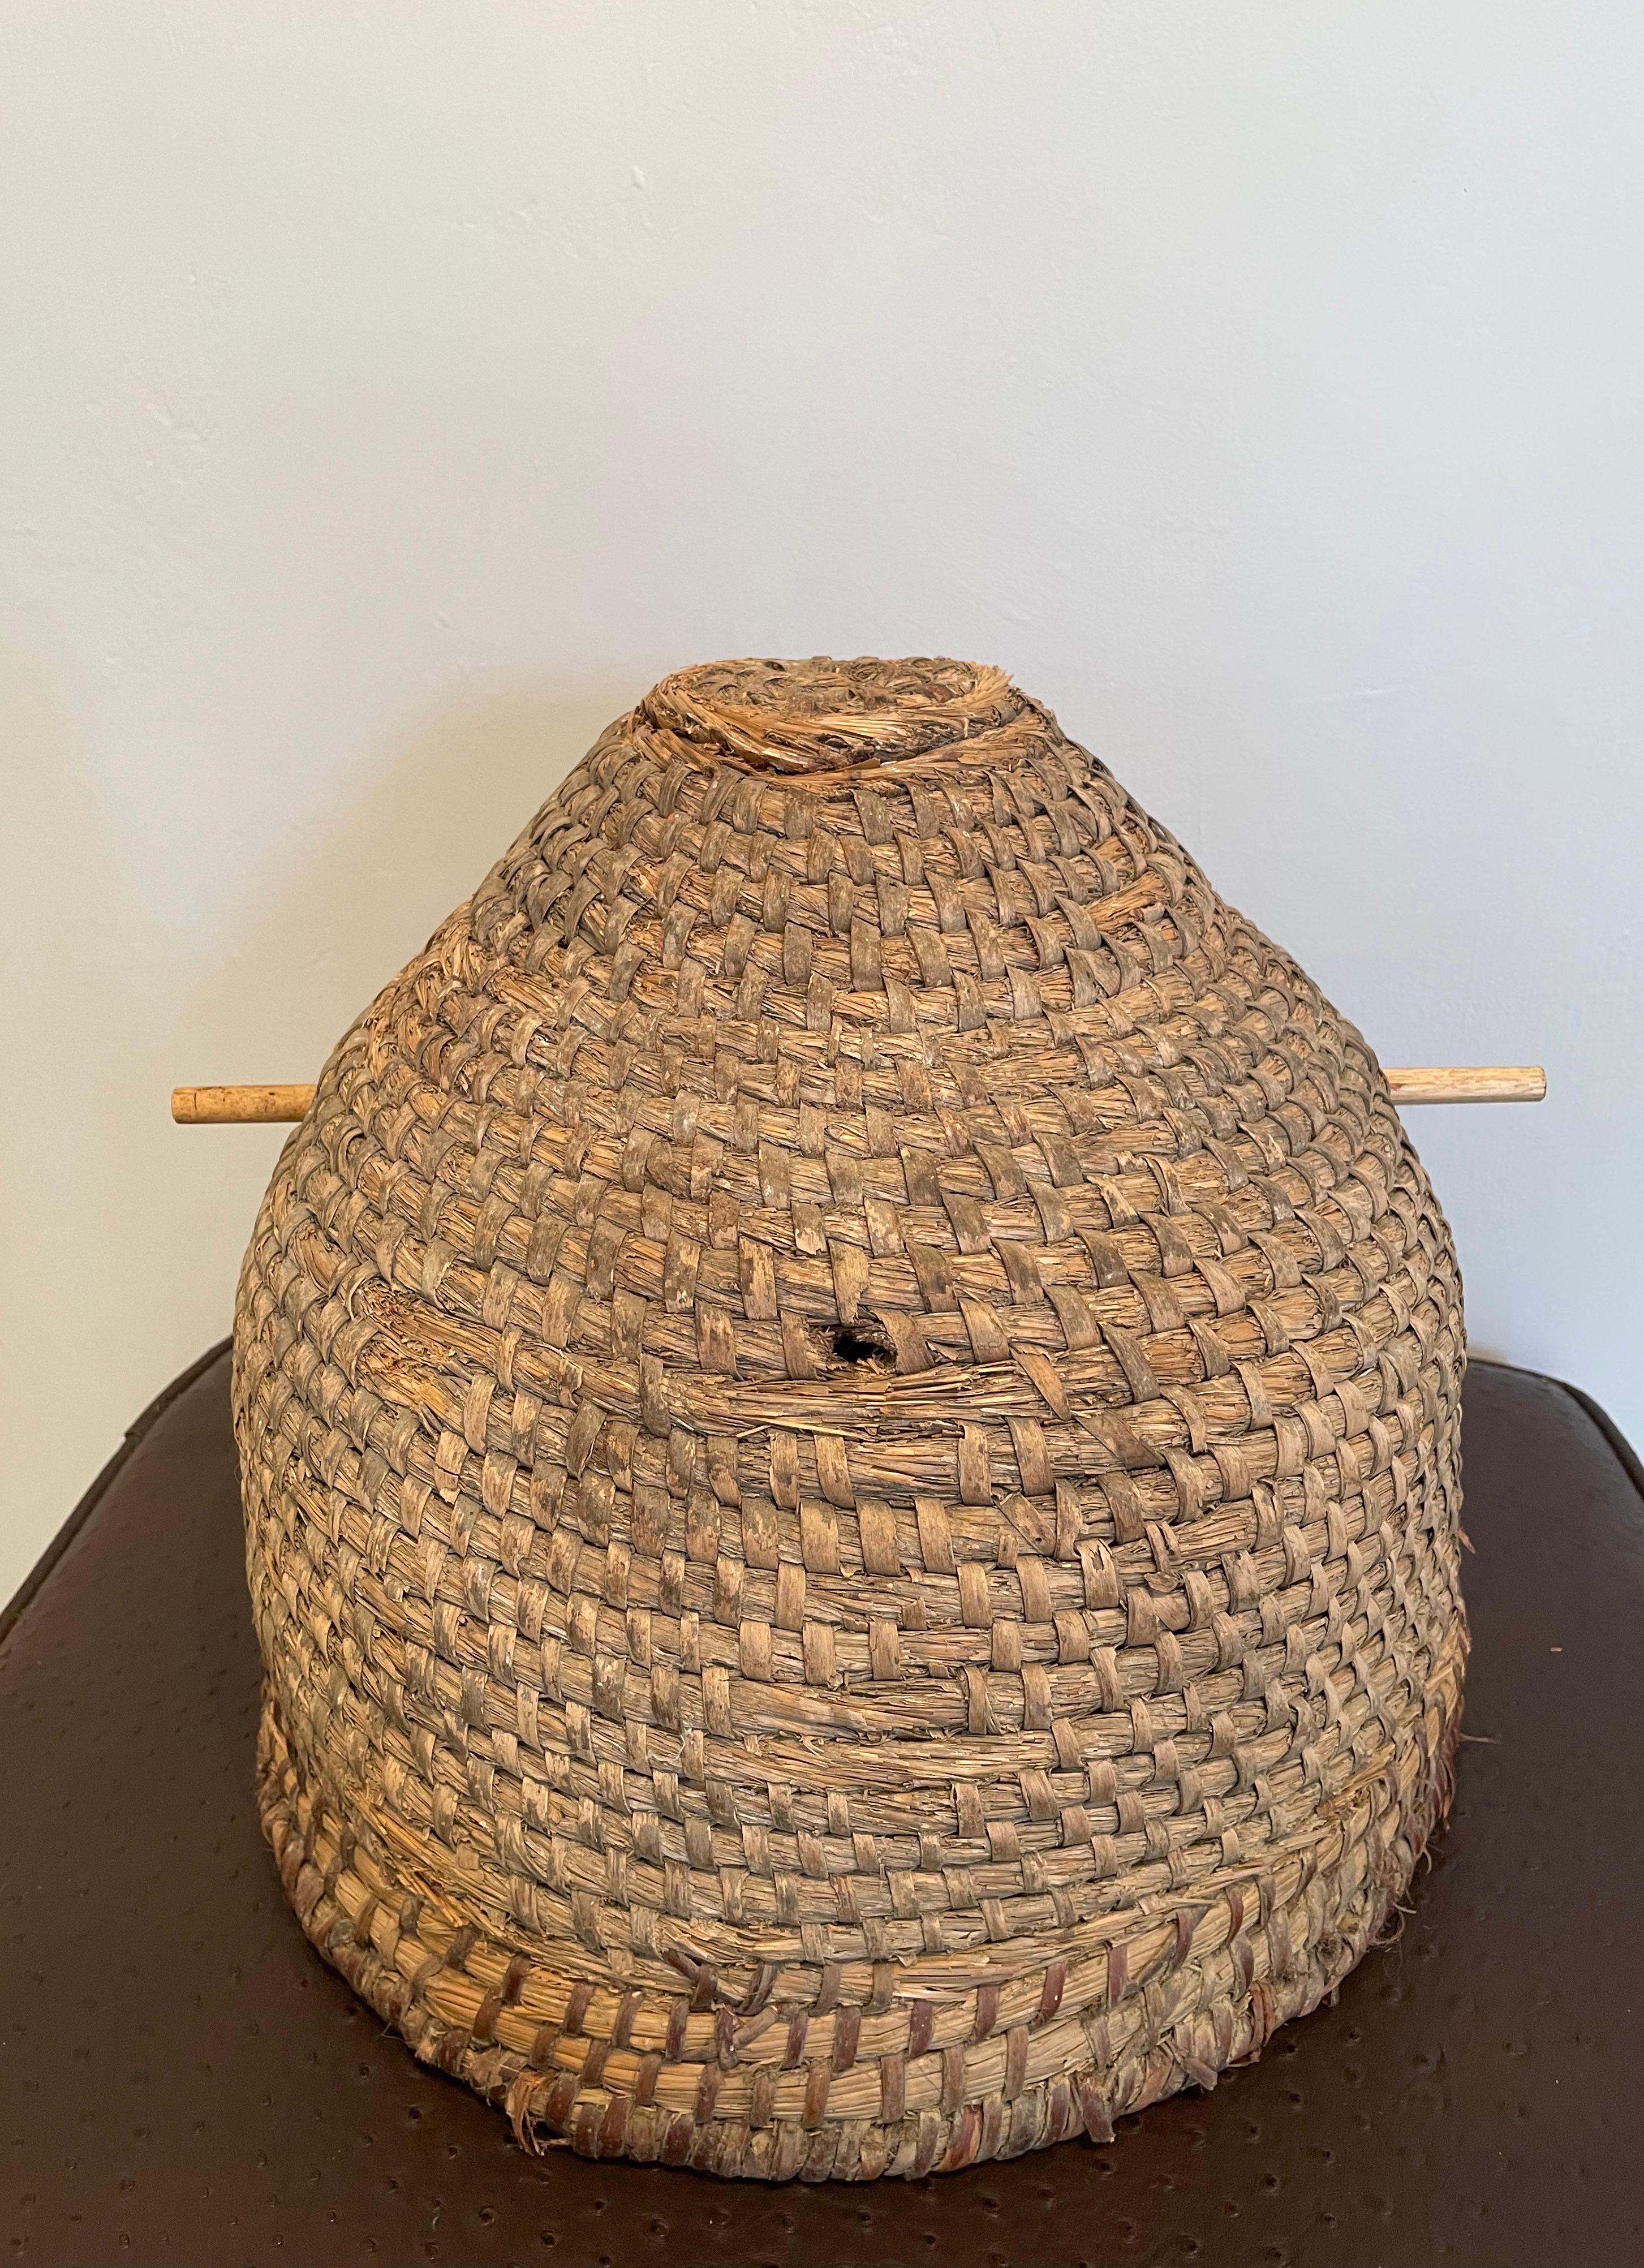 domed beehive made of twisted straw